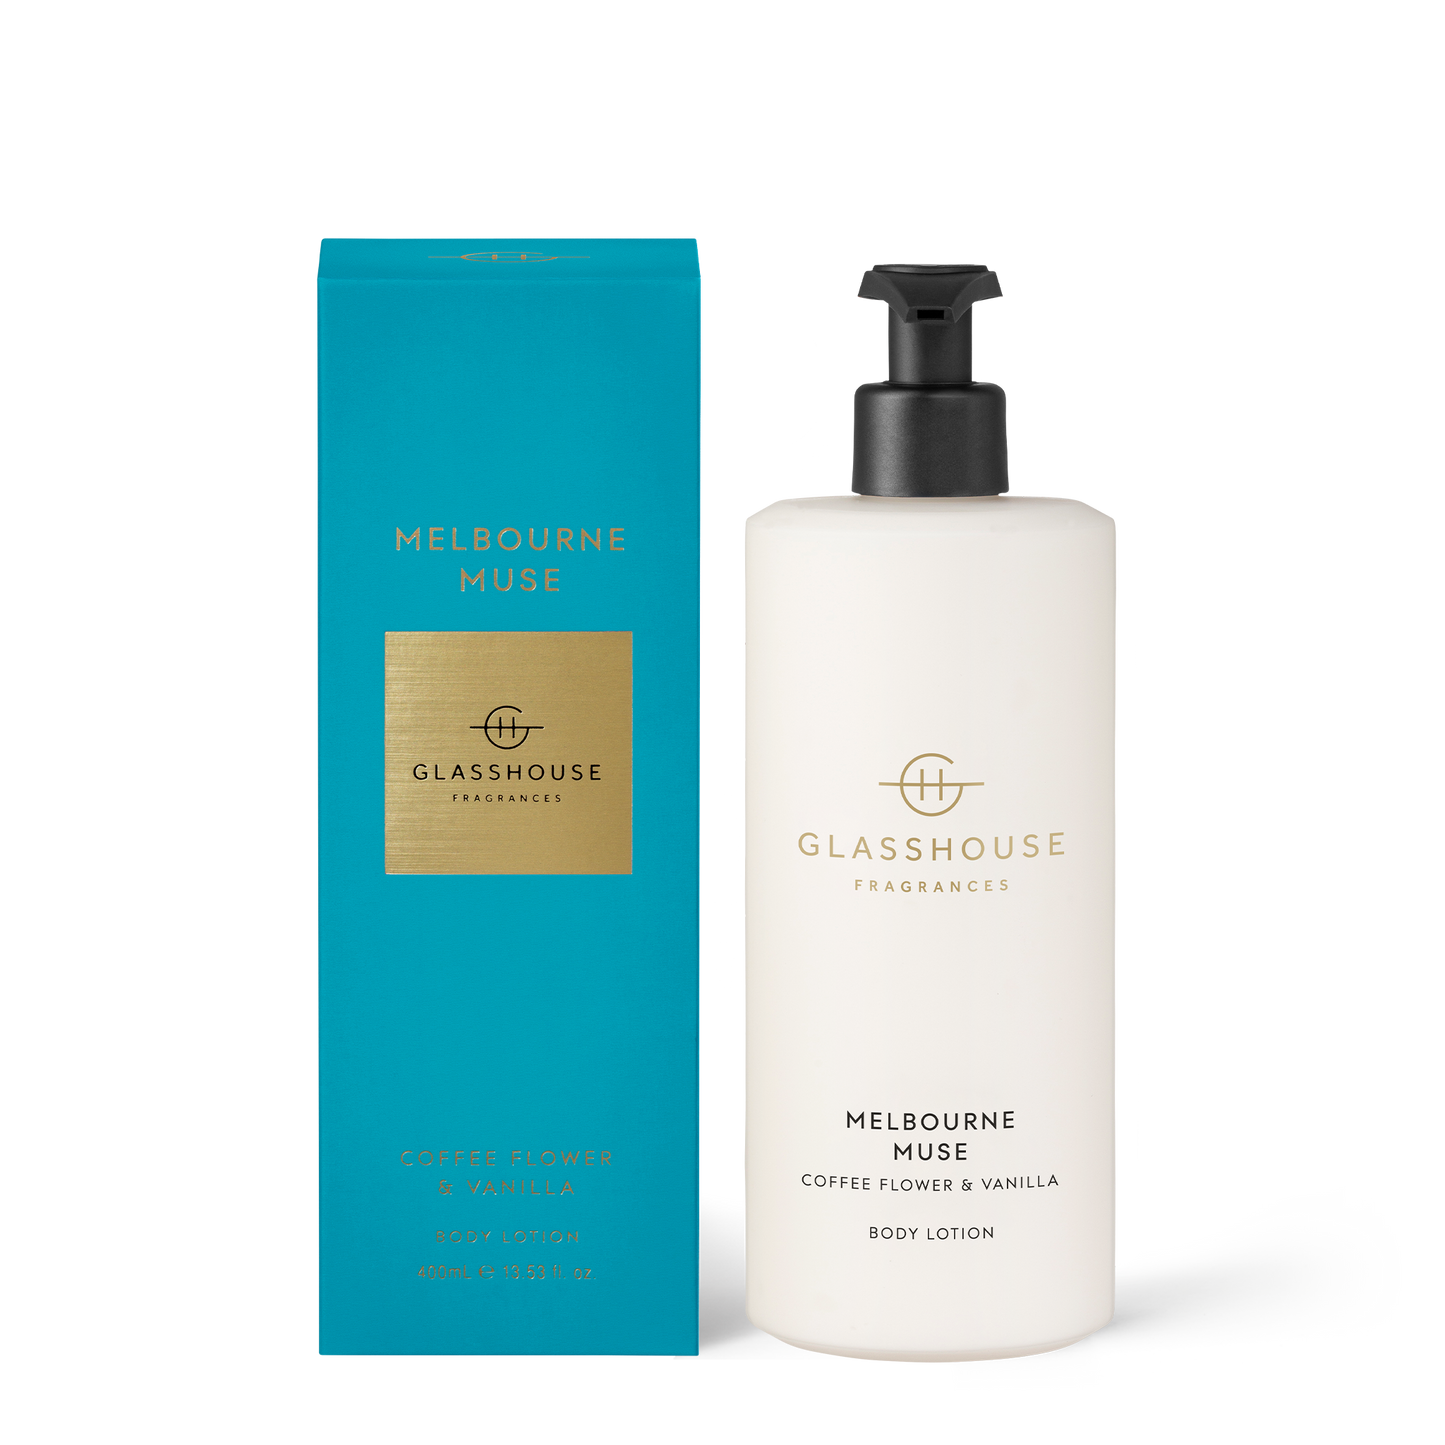 Glasshouse "Melbourne Muse" 400ml Body Lotion